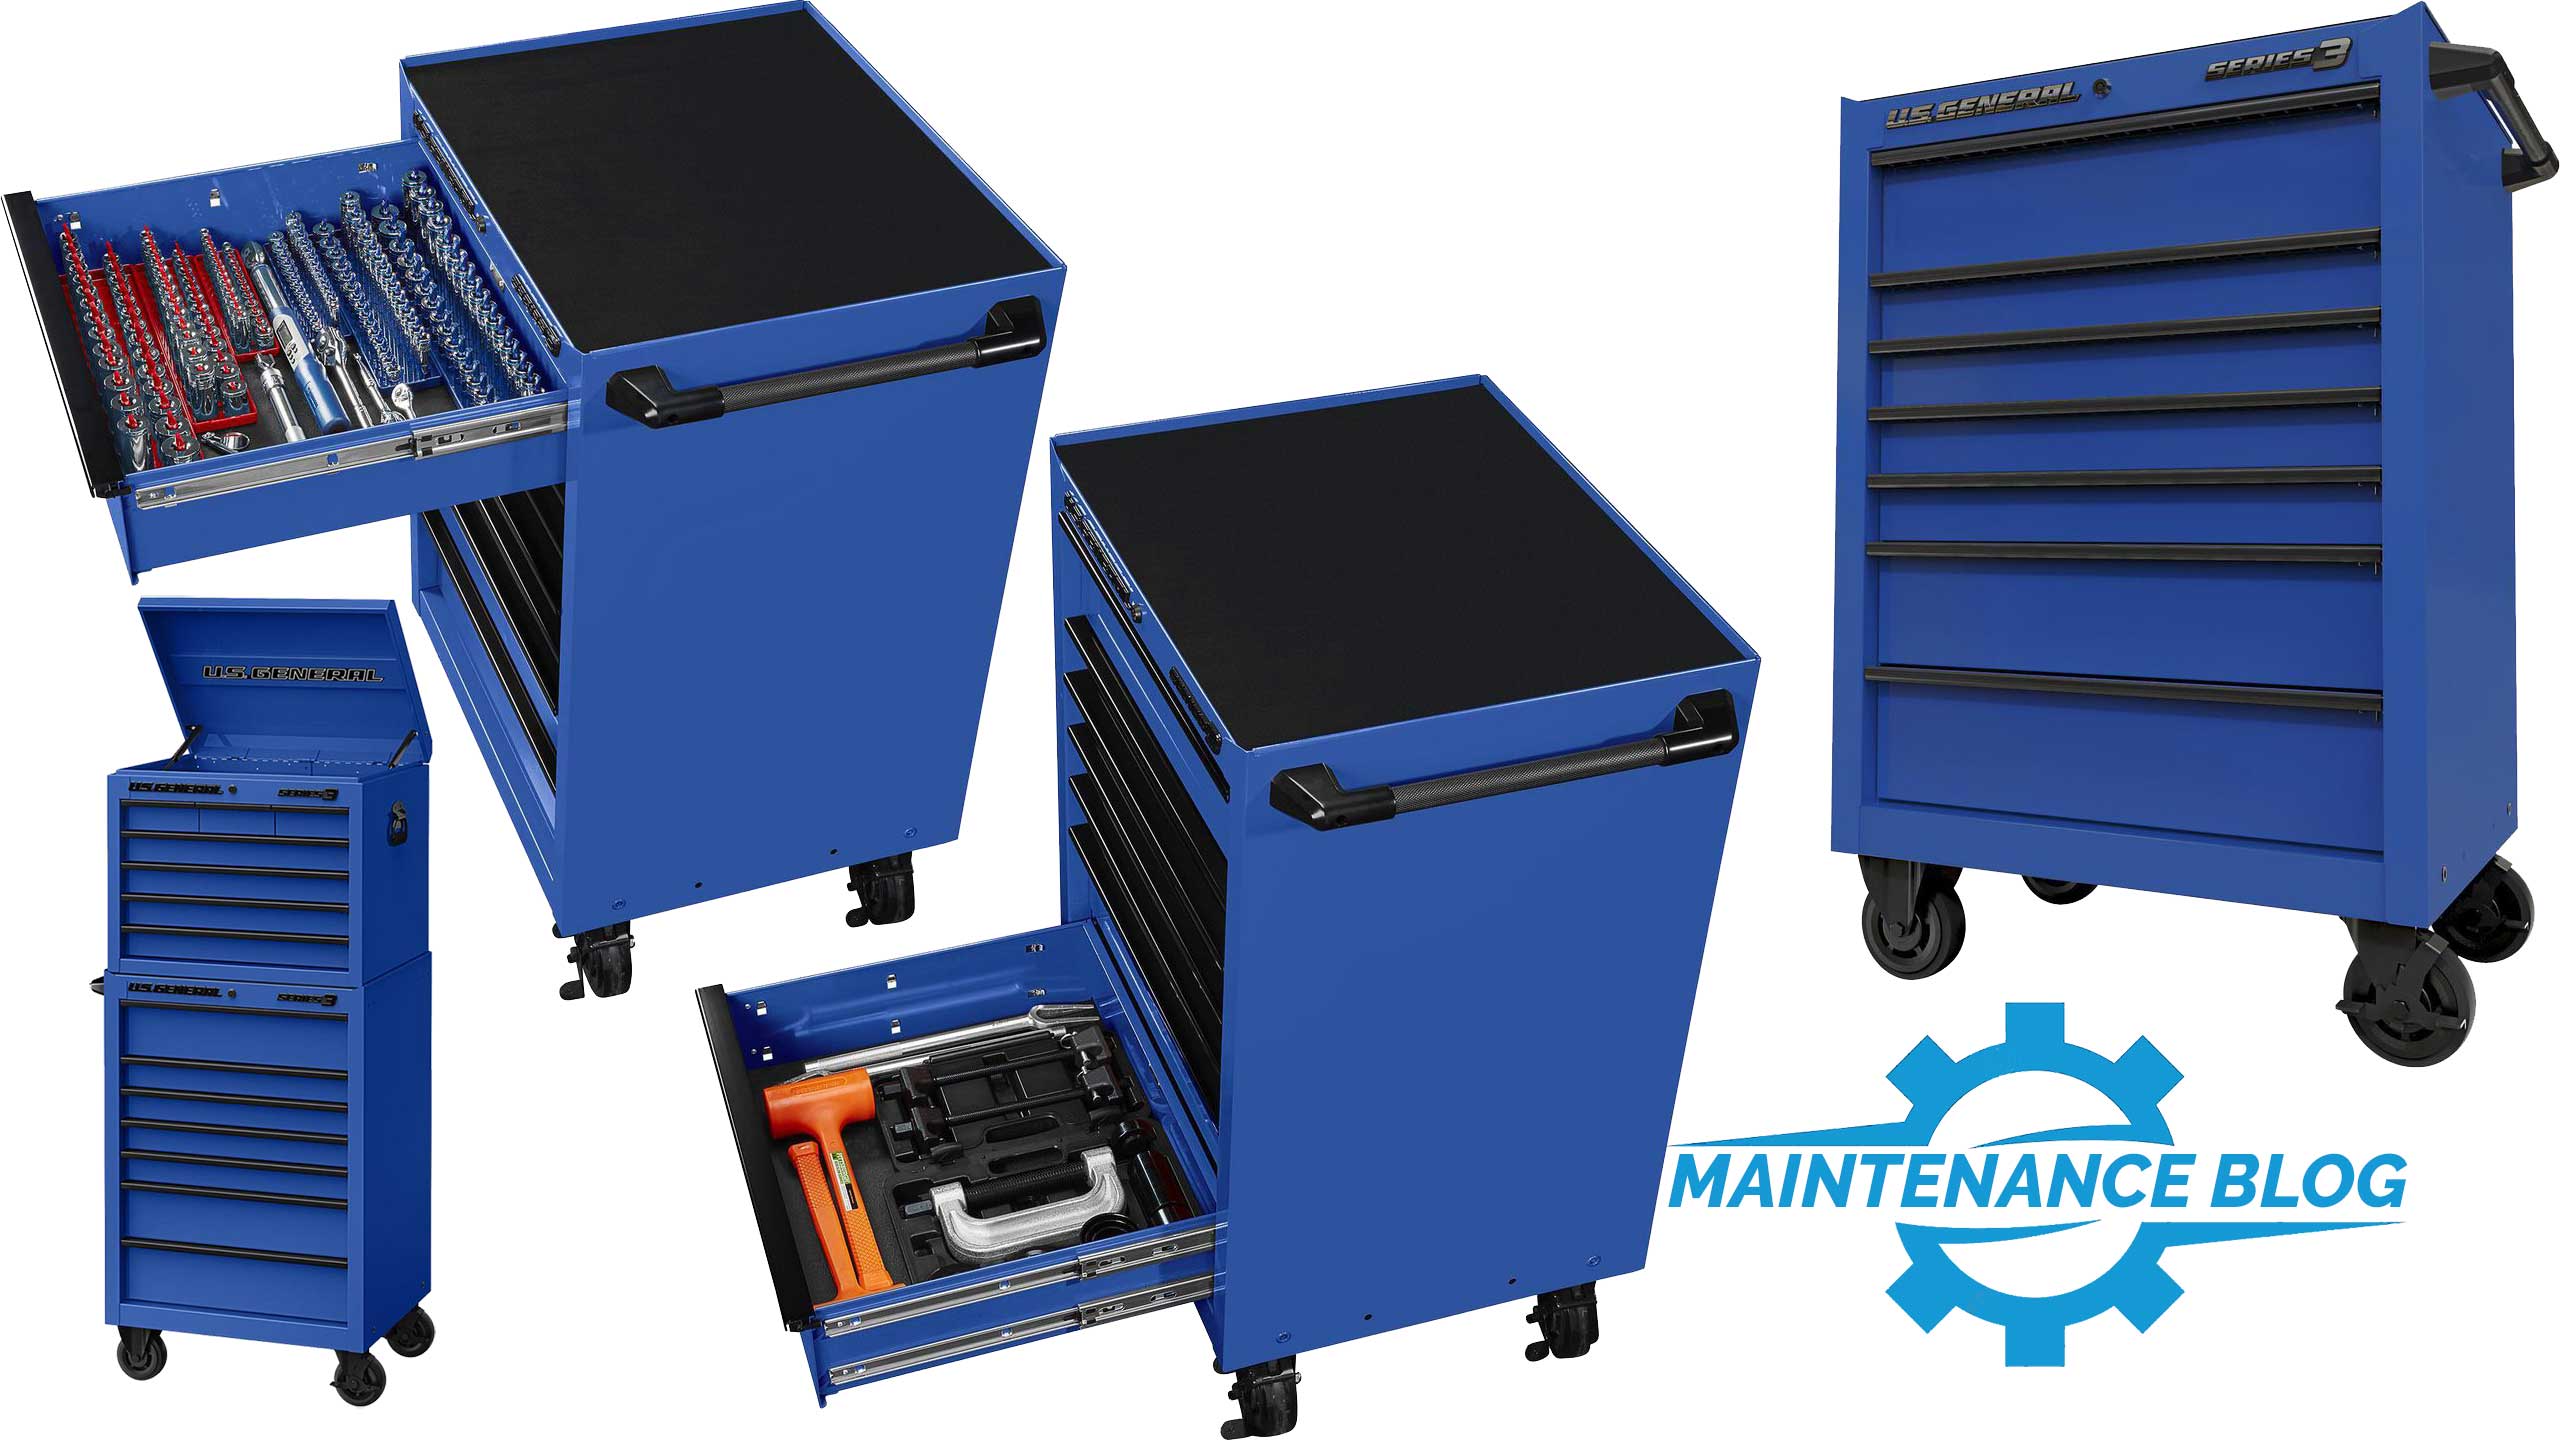 New Harbor Freight US General Series 3 Tool Boxes – First Look